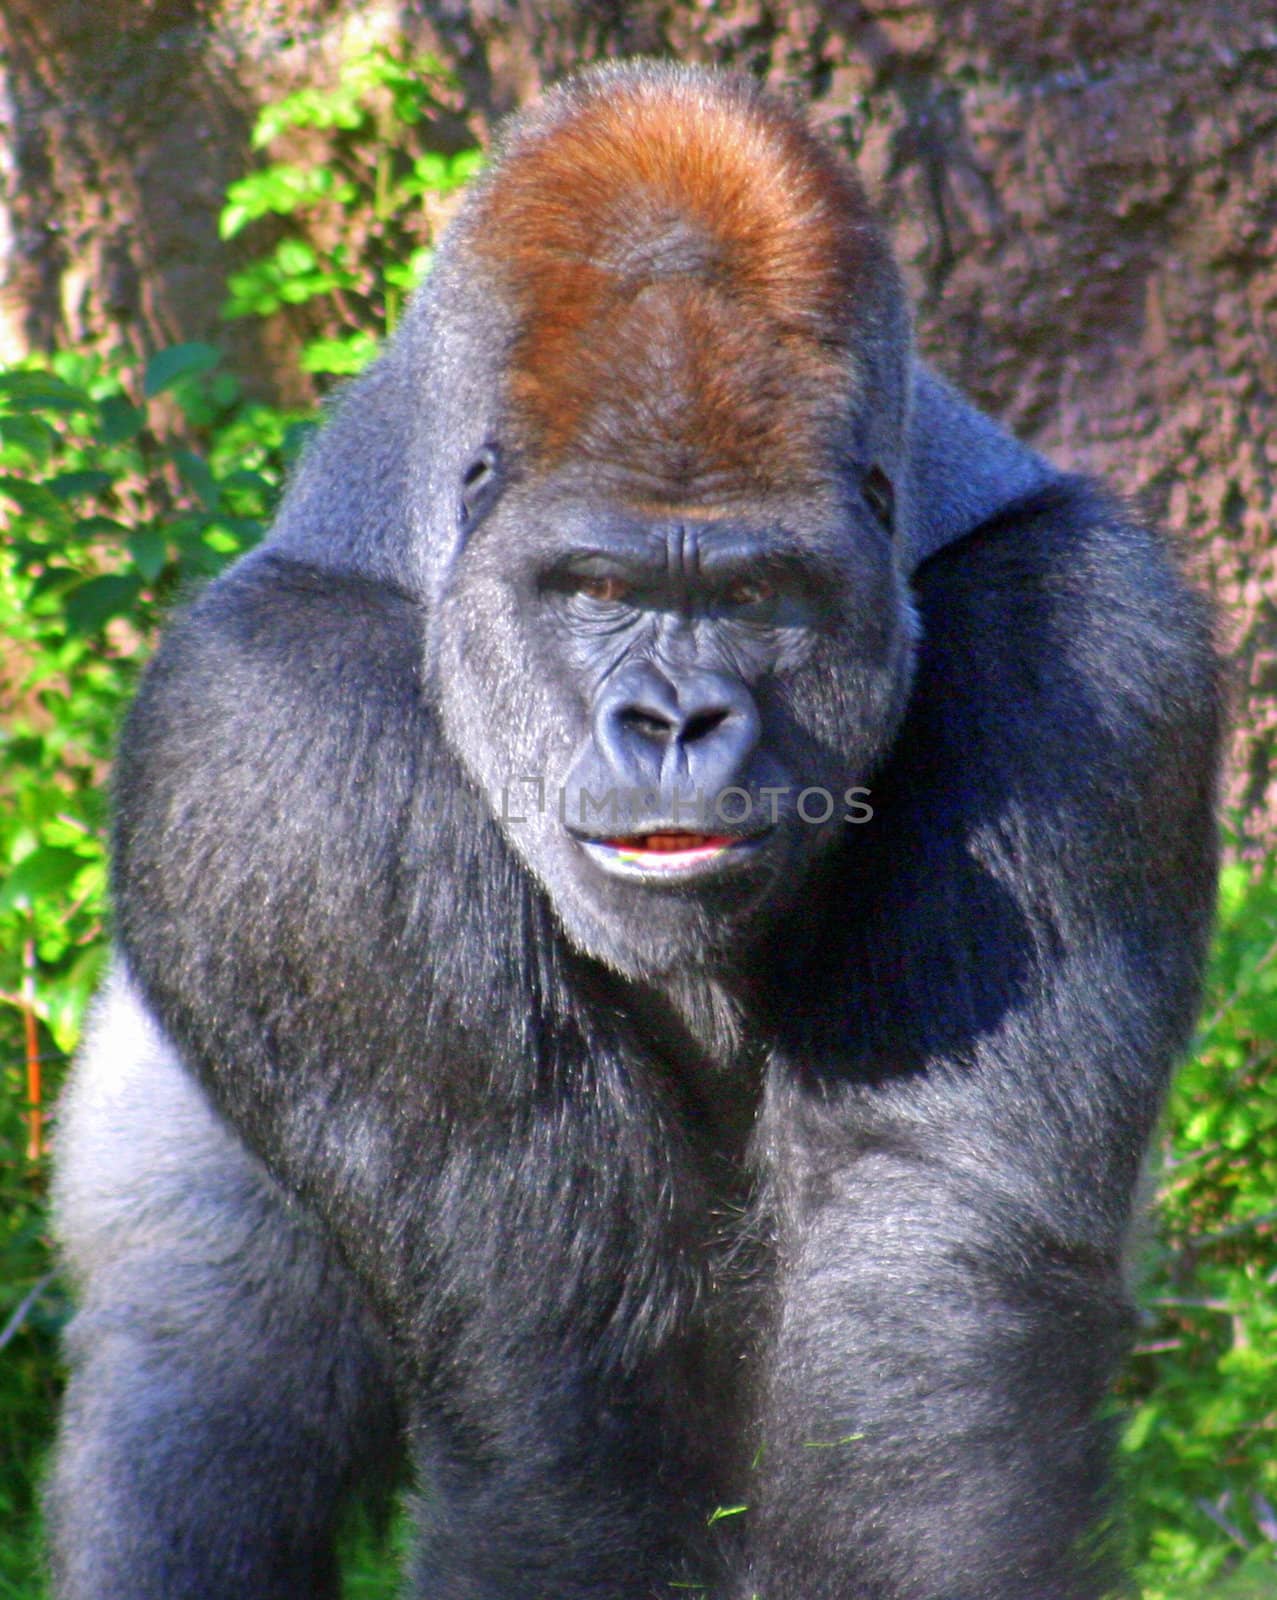 This gorilla was looking straight at me!